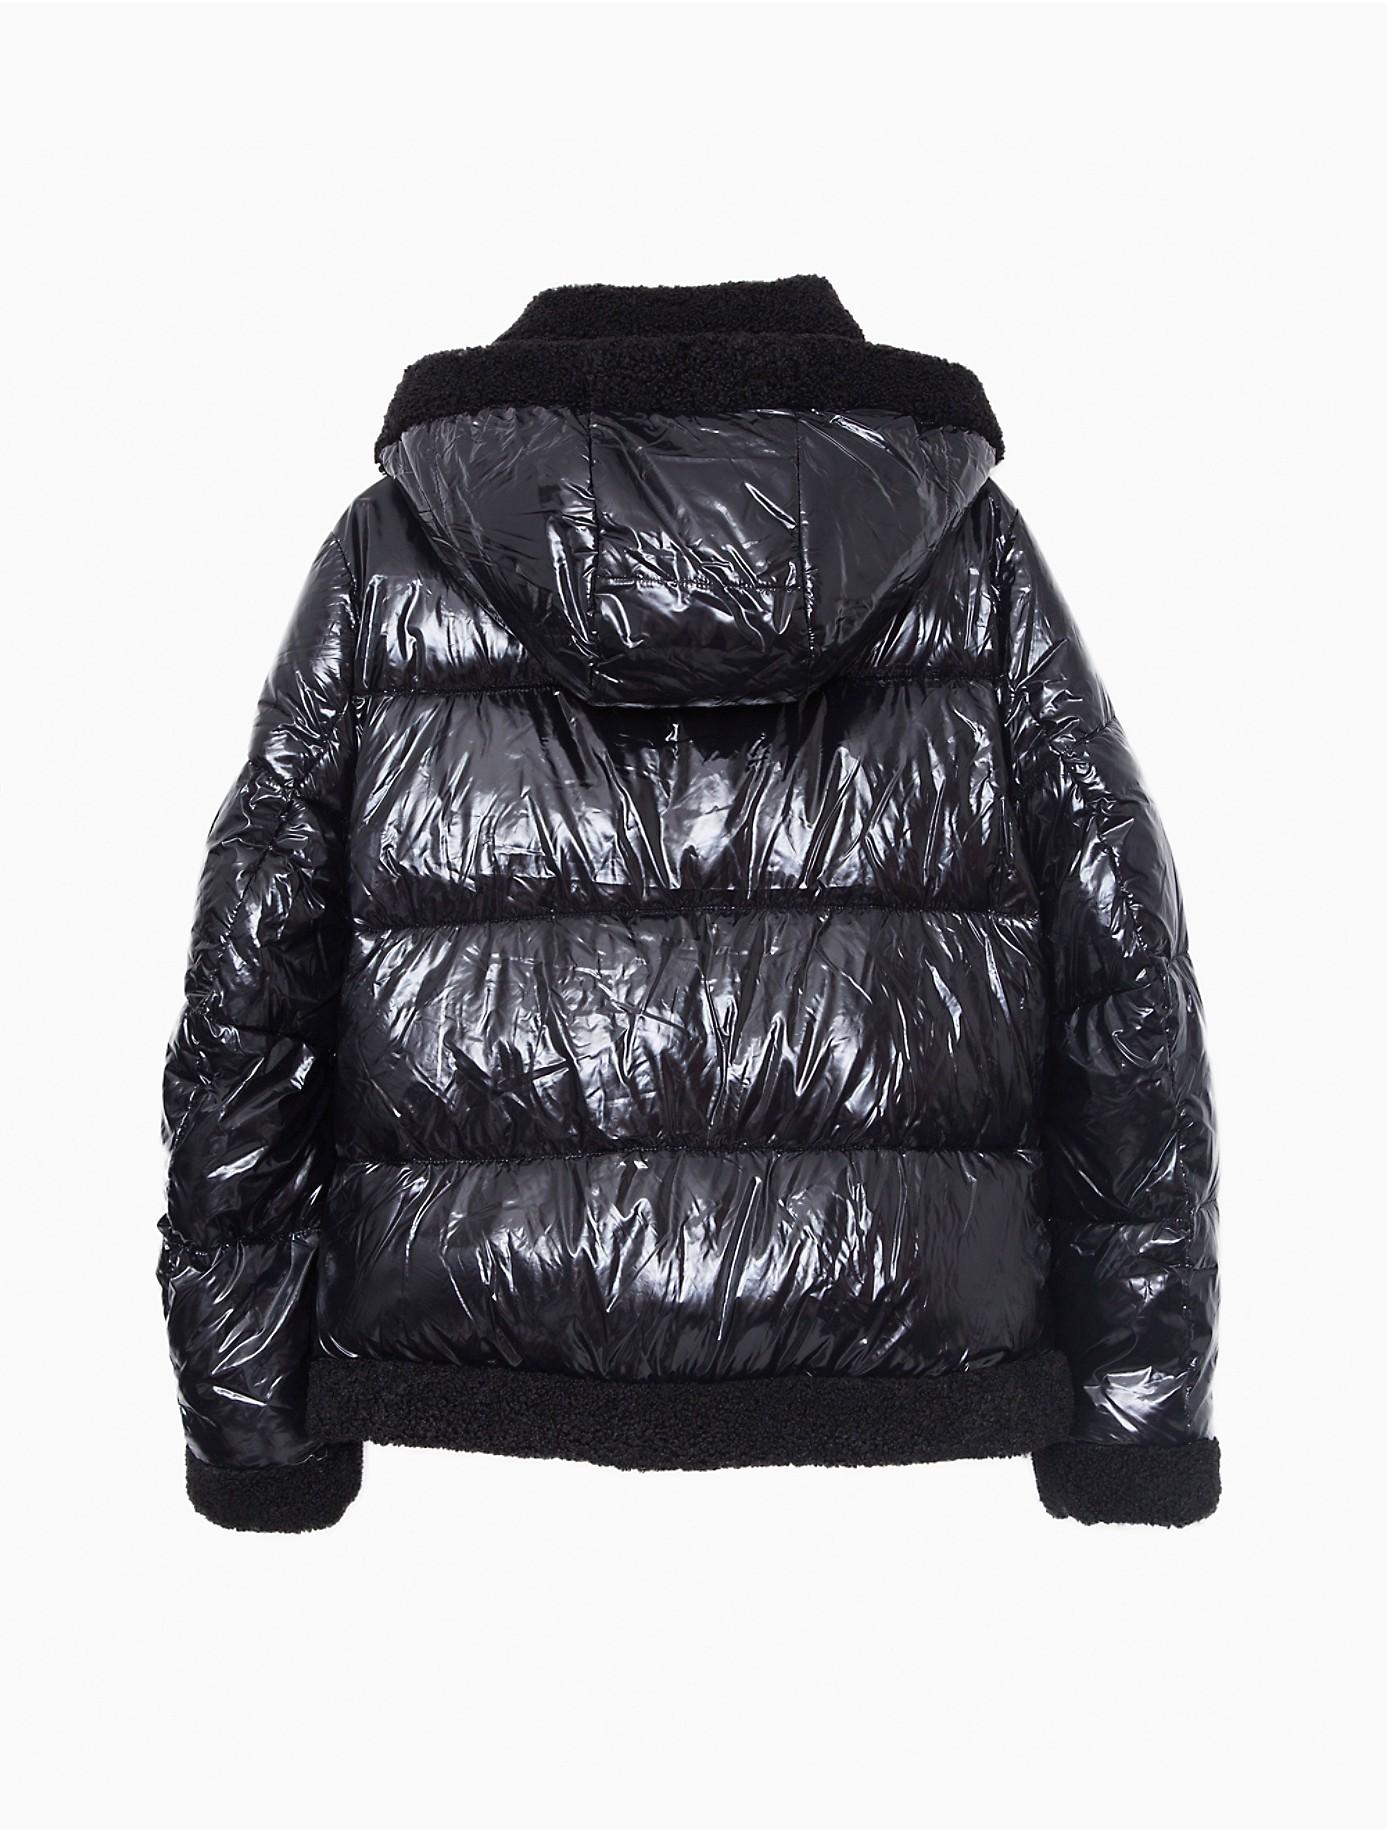 Calvin Klein Synthetic High Shine Sherpa Puffer Jacket in Black - Lyst